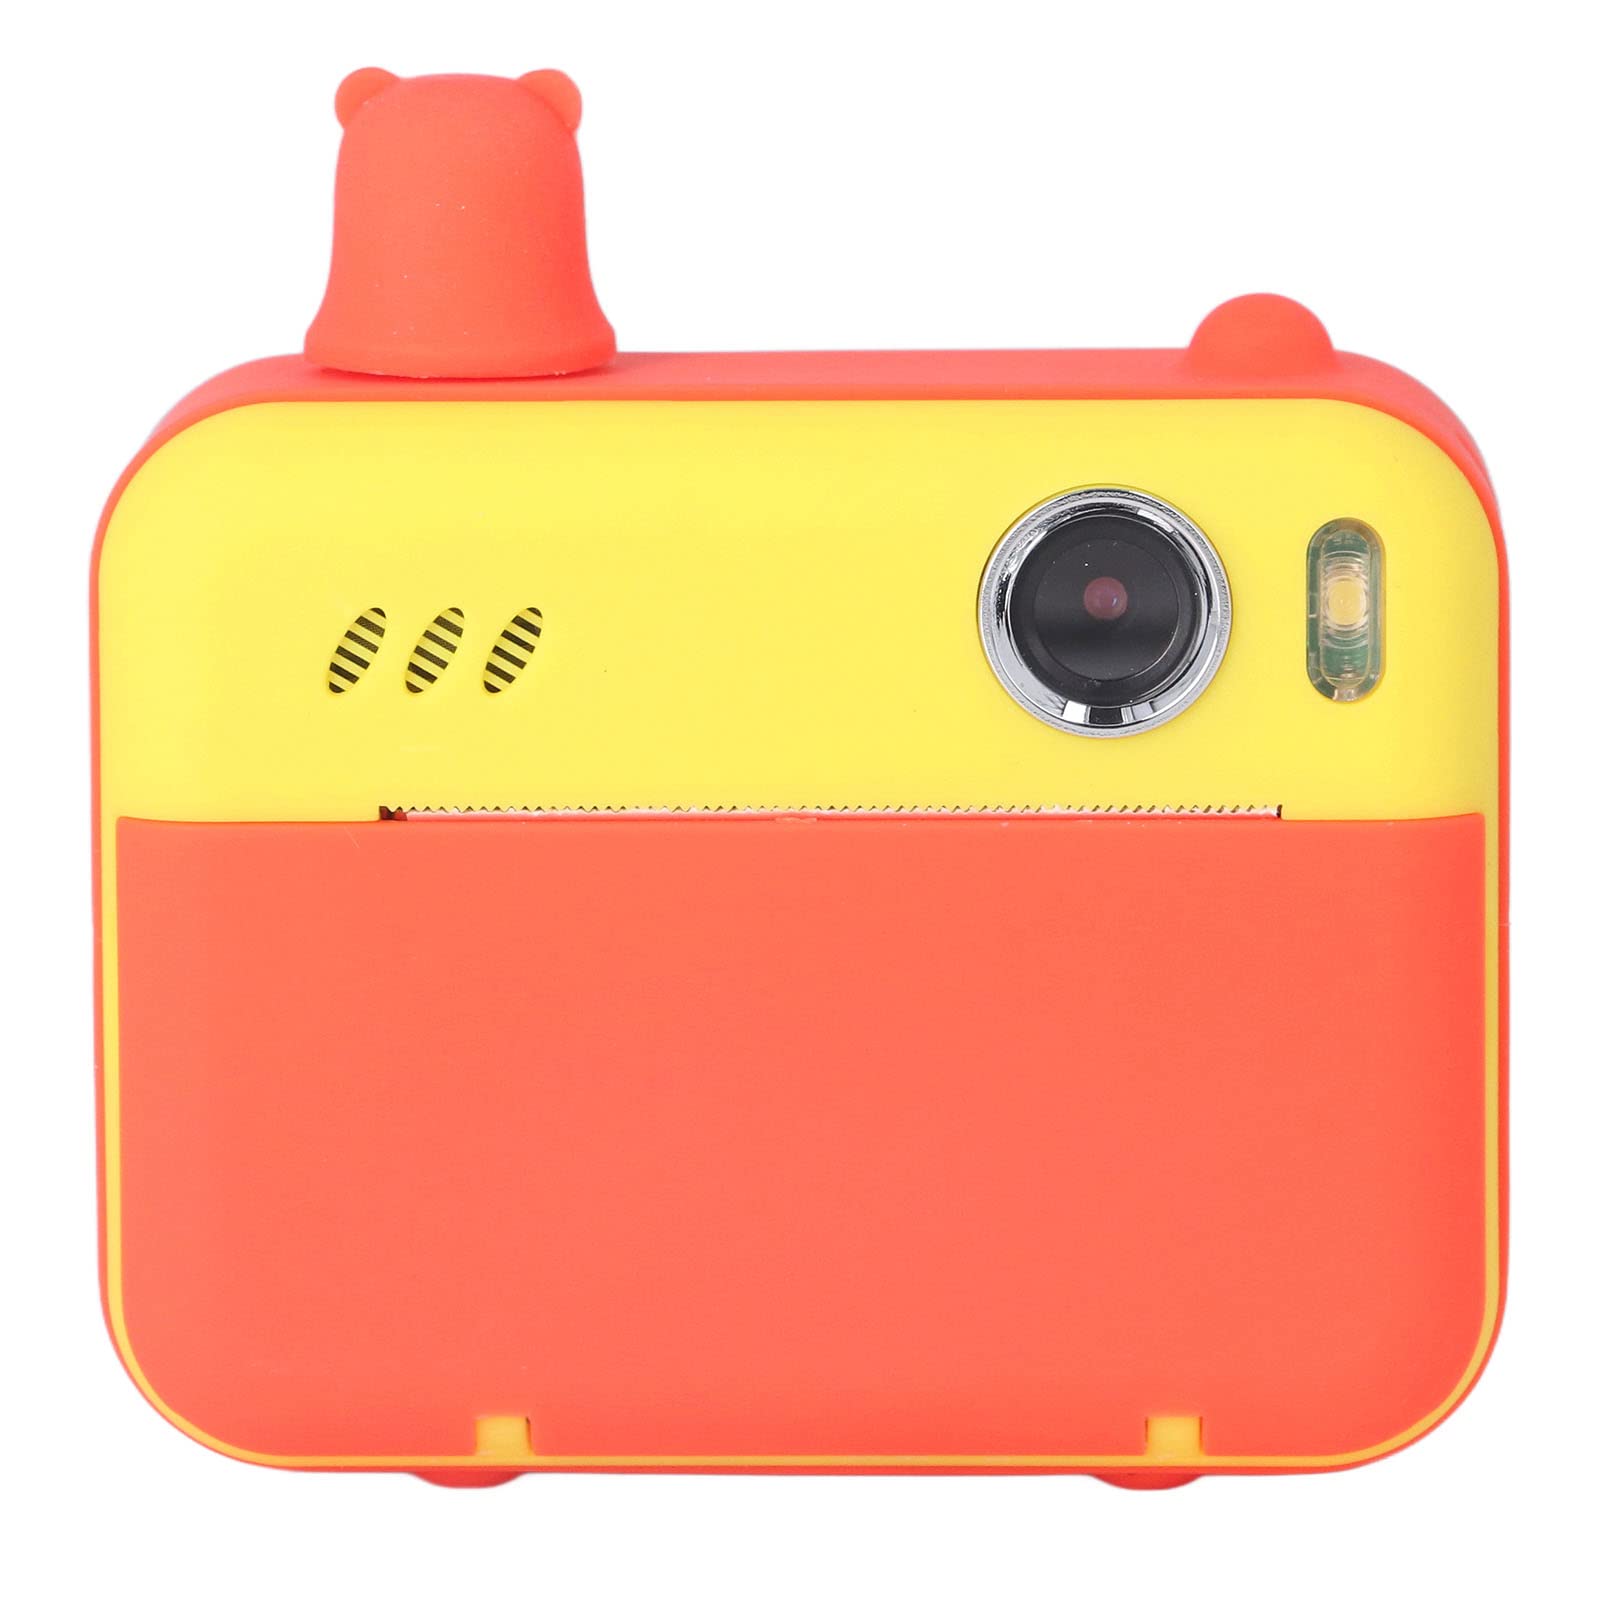 Camera for Kids, Child Selfie Camera Toy with 2.4in LCD Screen, Dual Lens HD 1080P Thermal Printing Camera with Lanyard Boys Girls (Yellow)